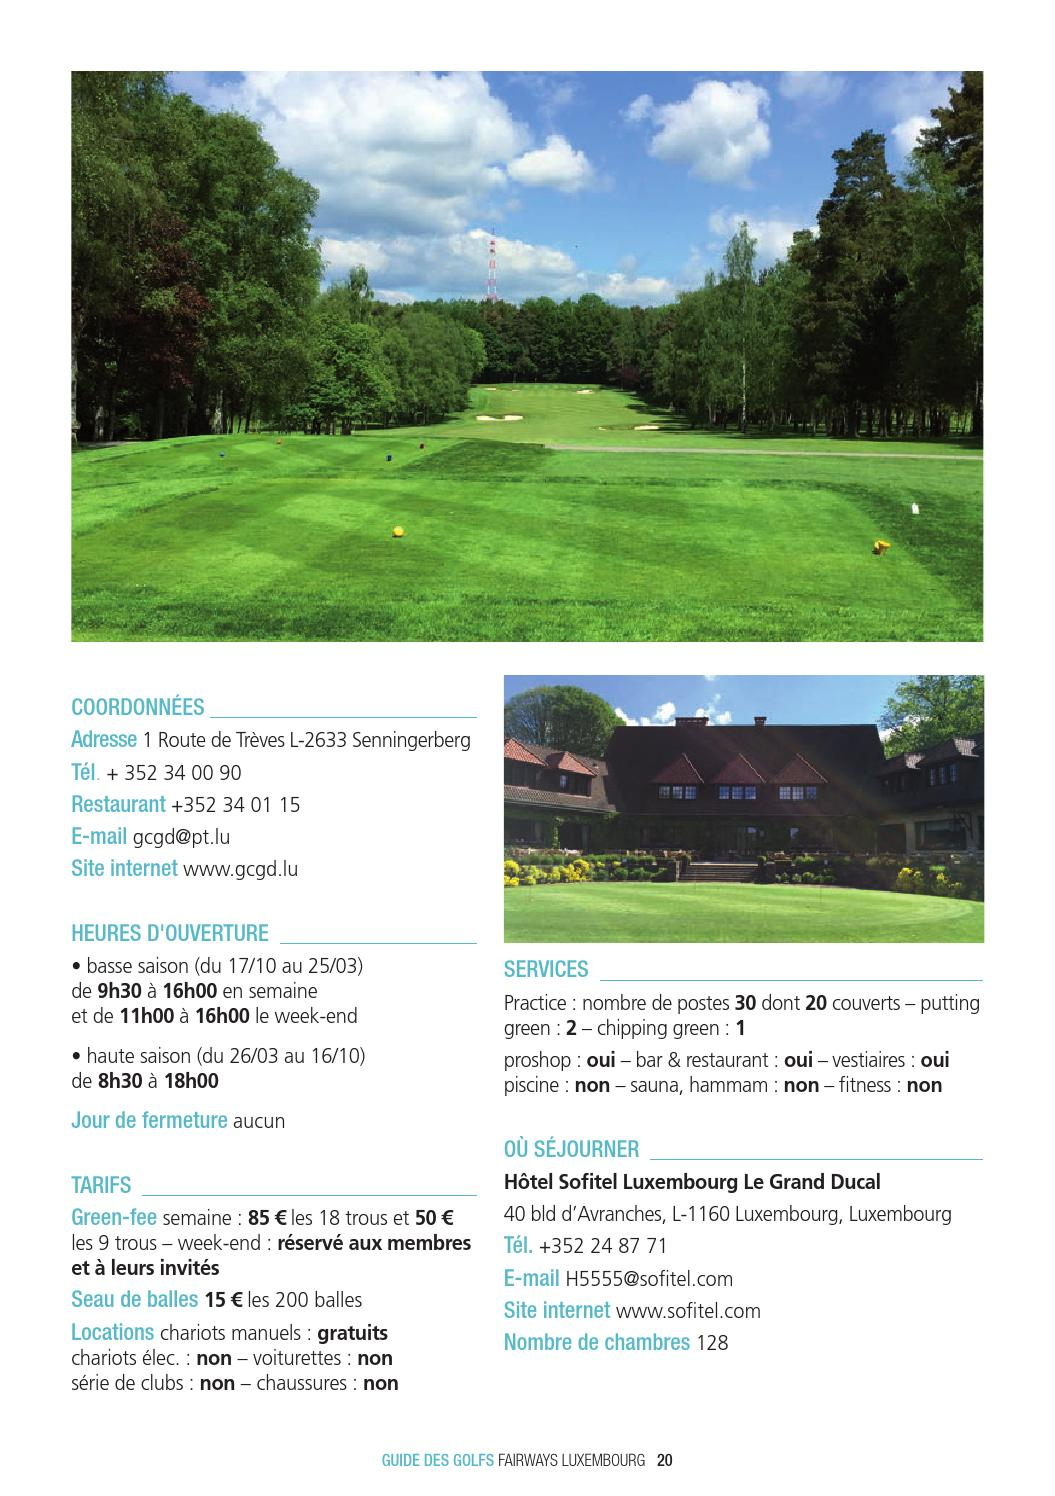 Guide Des Golfs 2016 By H2A - Issuu tout Piscine Avranches